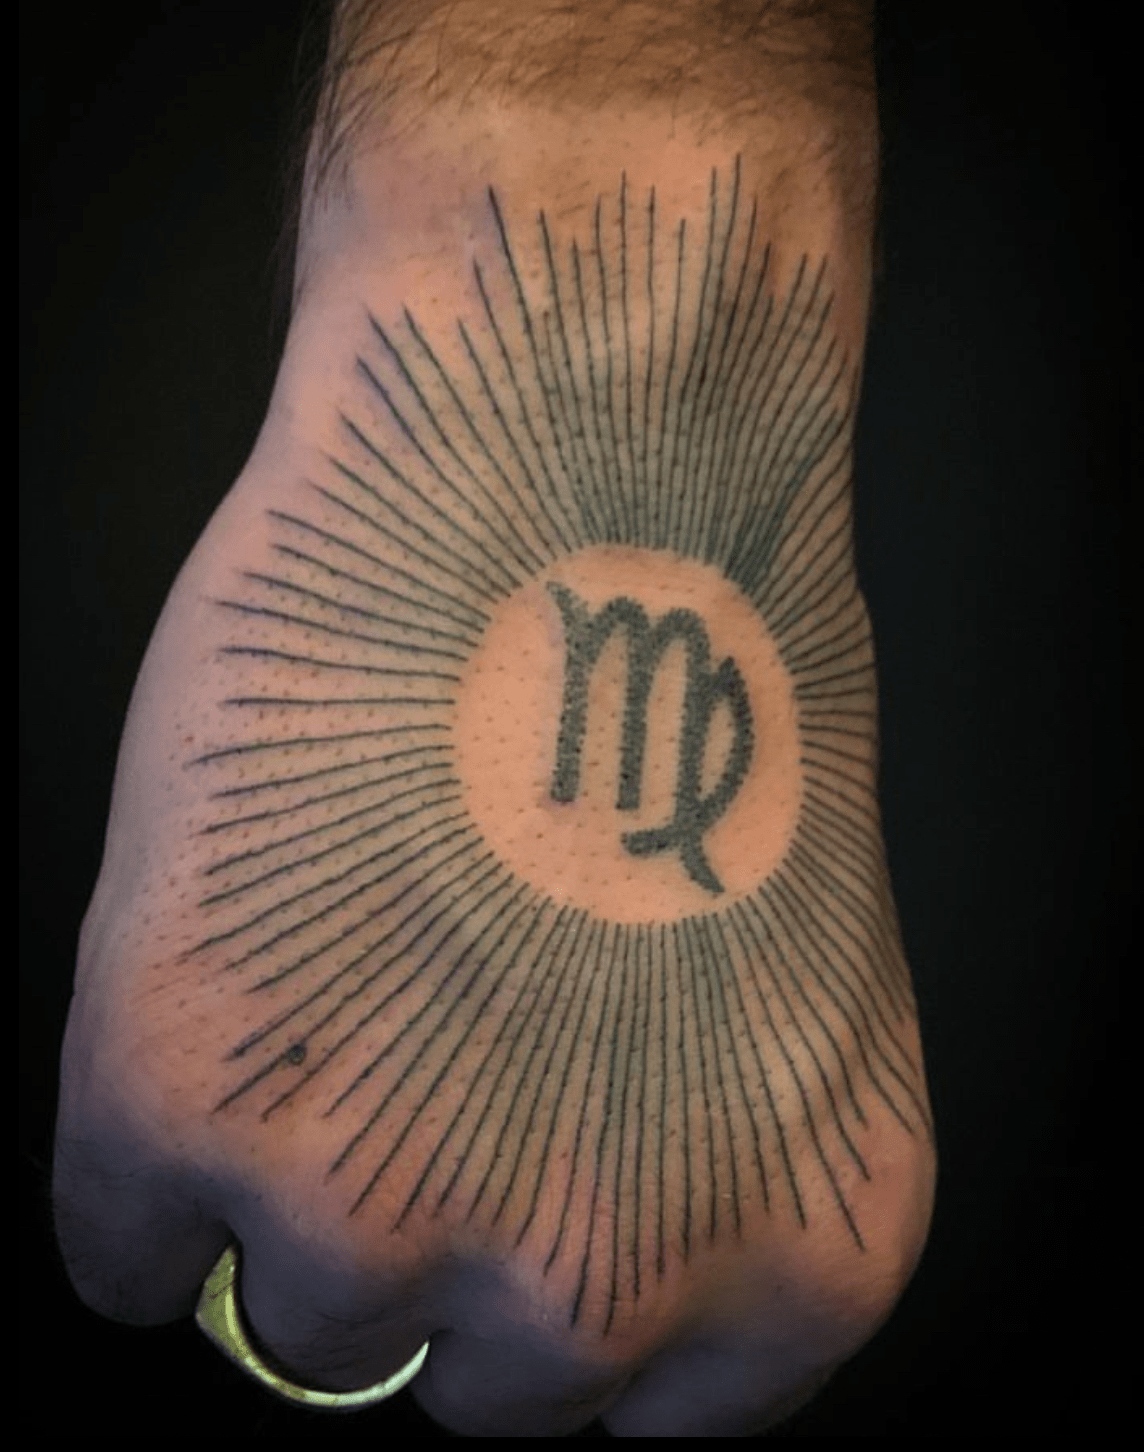 21 Virgo Tattoos That'll Satisfy Your Inner Perfectionist – Fortunate Goods